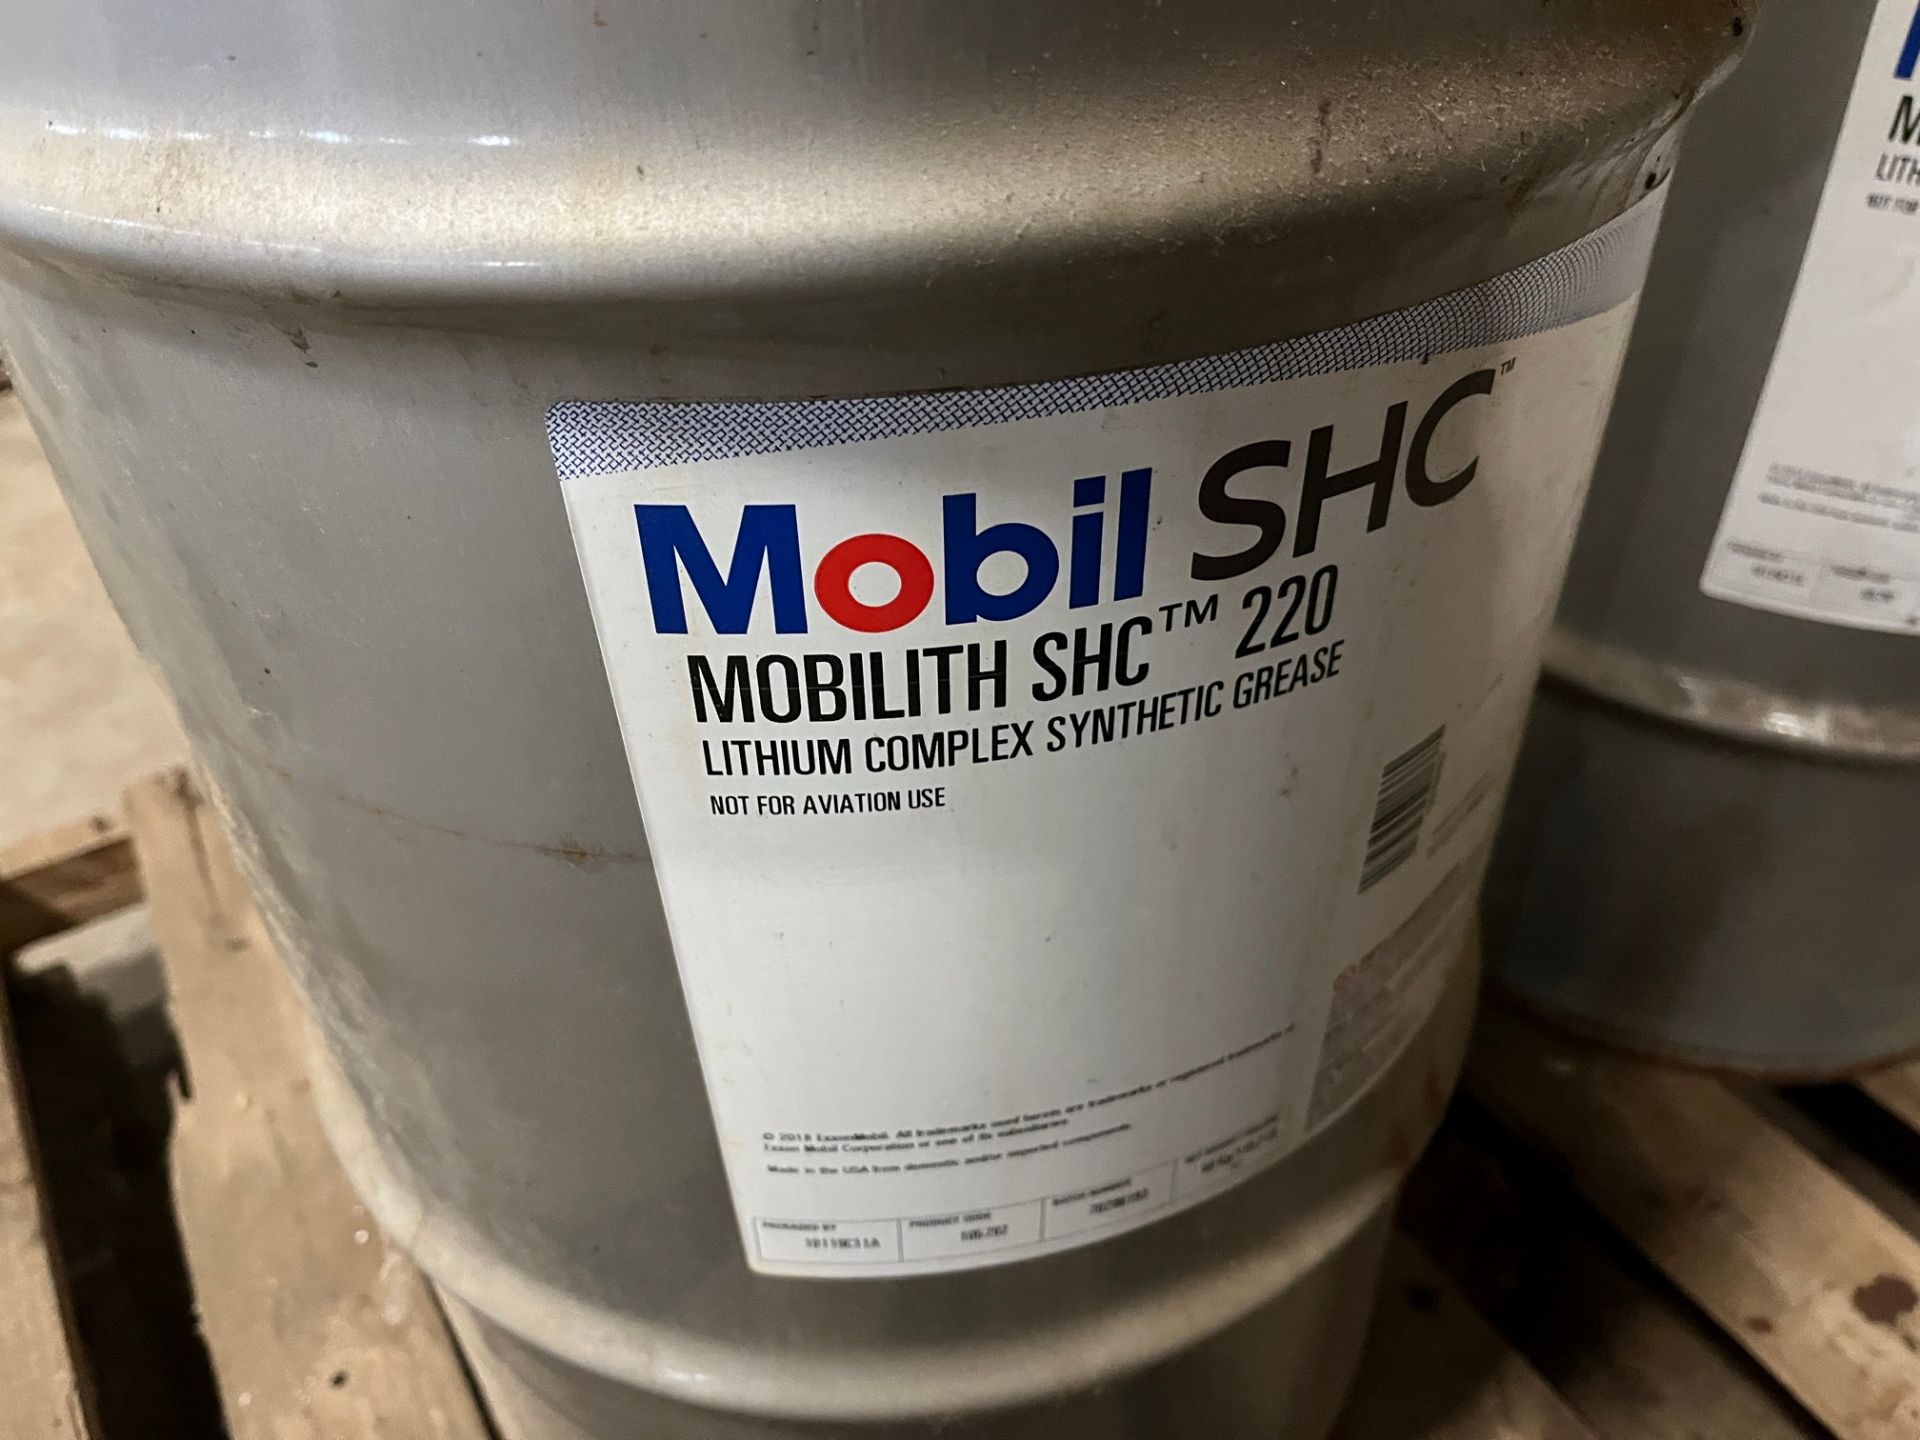 LOT OF (2) SMALLER BARRELS OF MOBIL SHC MOBILITH SHC 220 LITHIUM COMPLEX SYNTHETIC GREASE (PM MAIN - Image 2 of 2